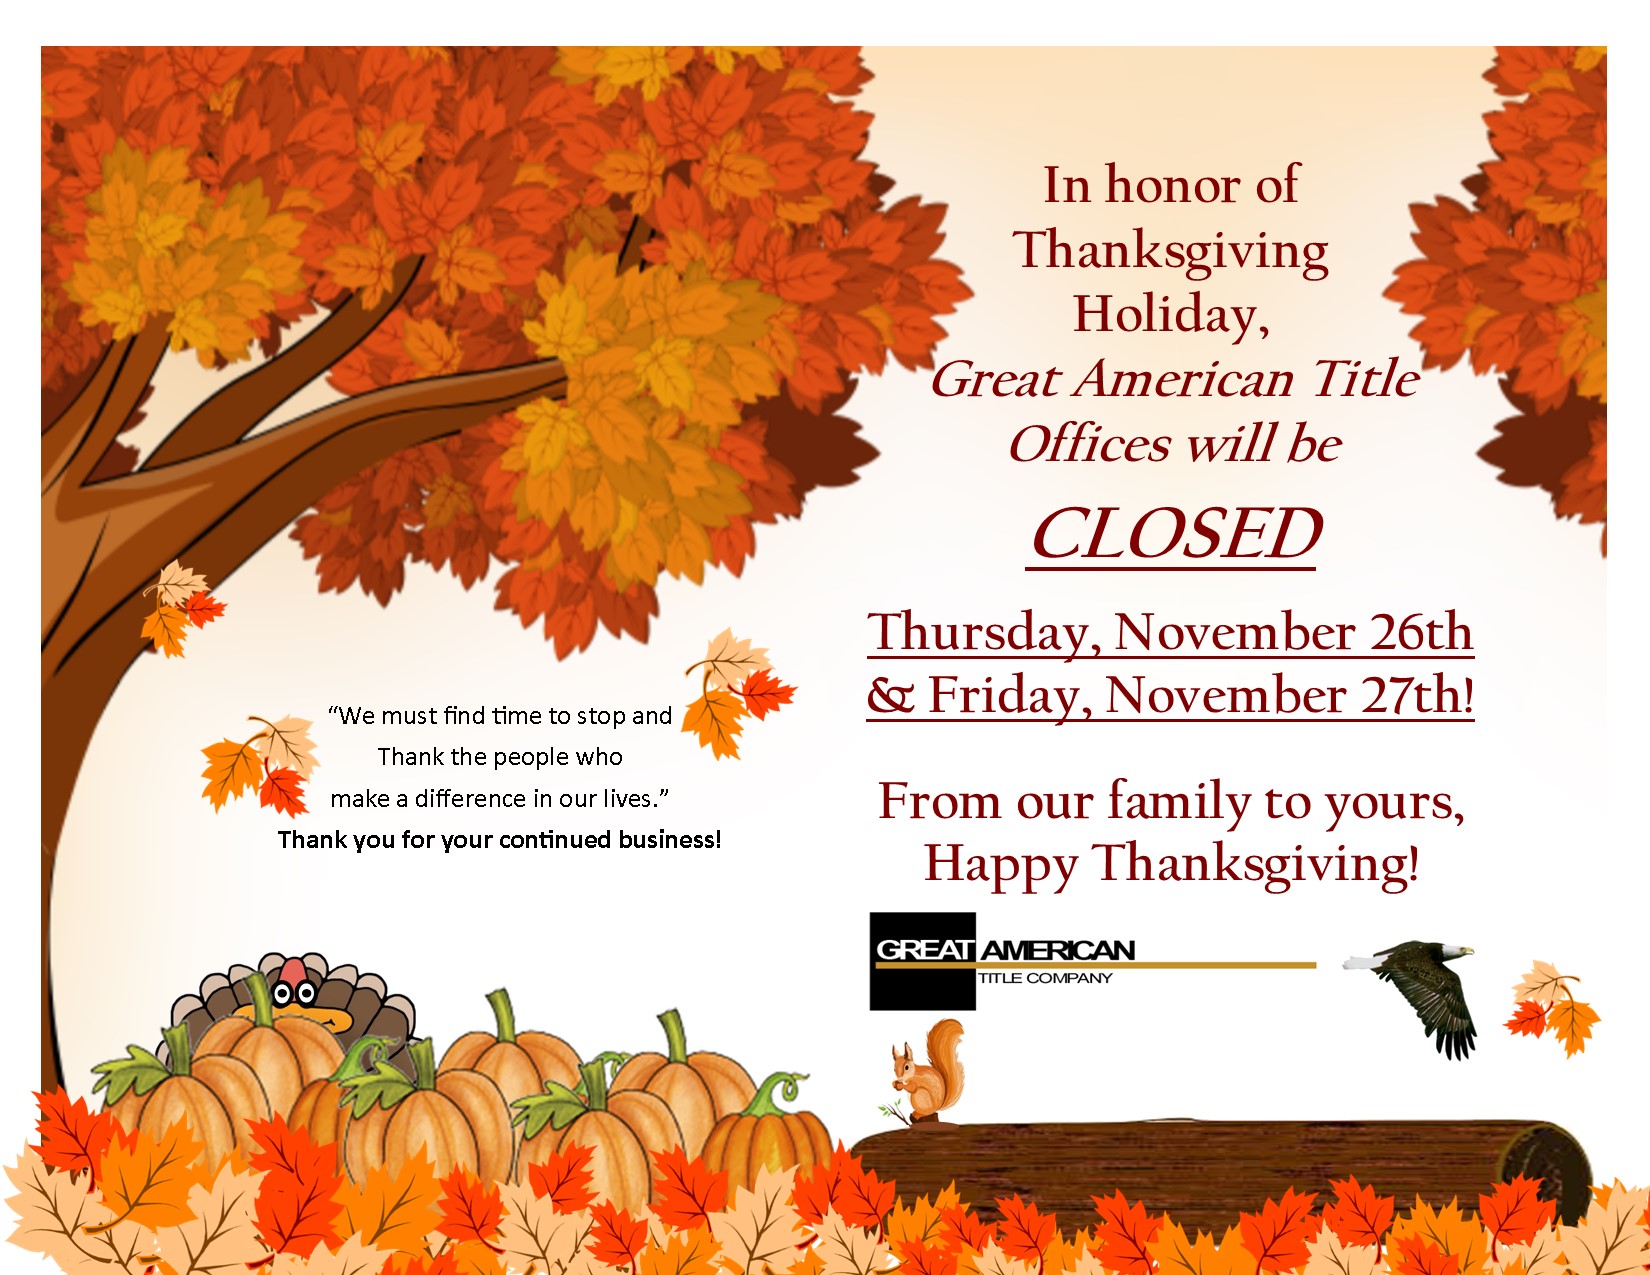 We will be CLOSED for Thanksgiving Holiday on November 26th and 27th Great American Title Company